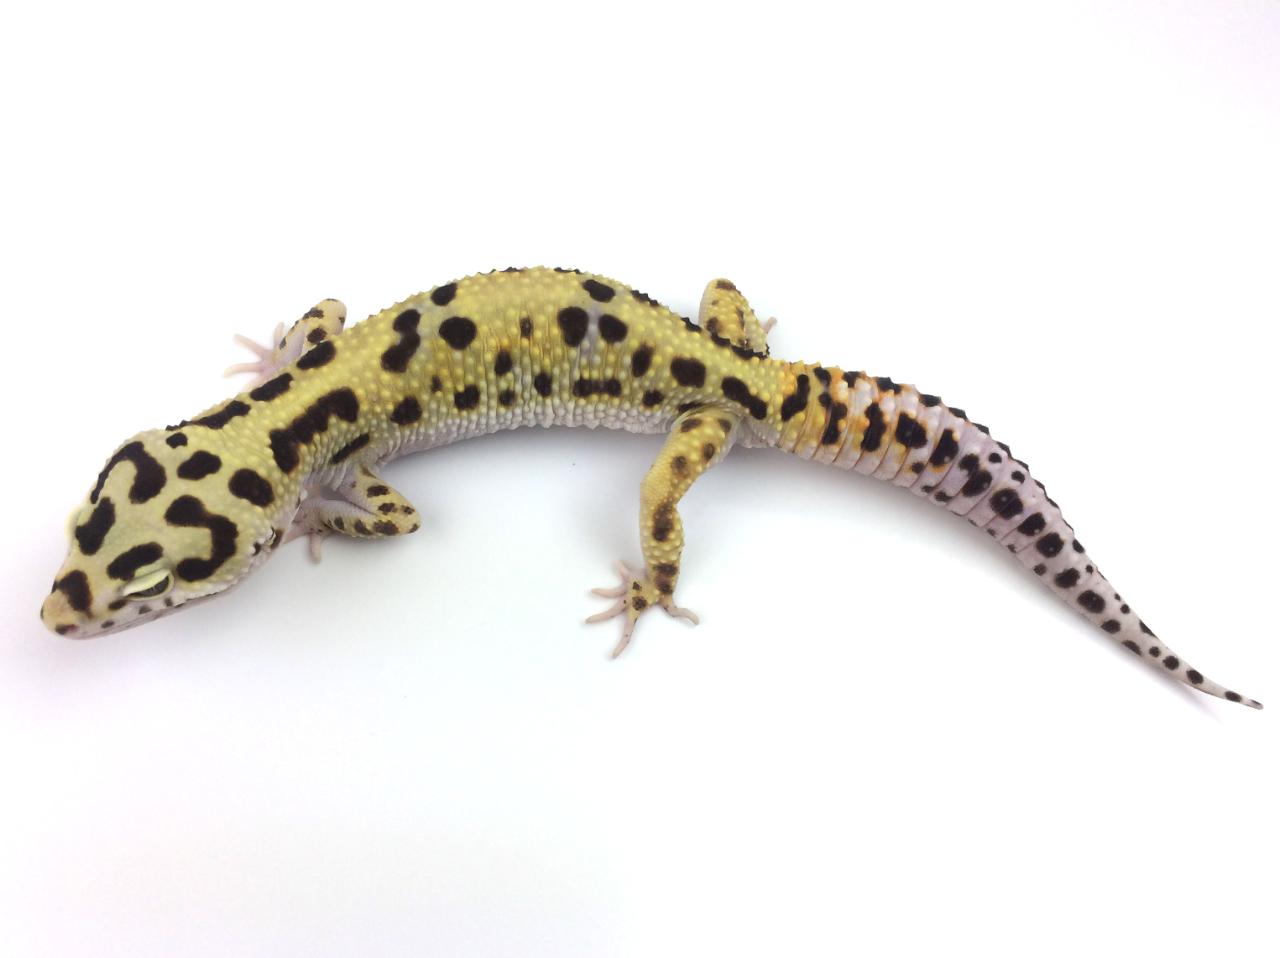 Bandit Leopard Gecko by Royal Constrictor Designs